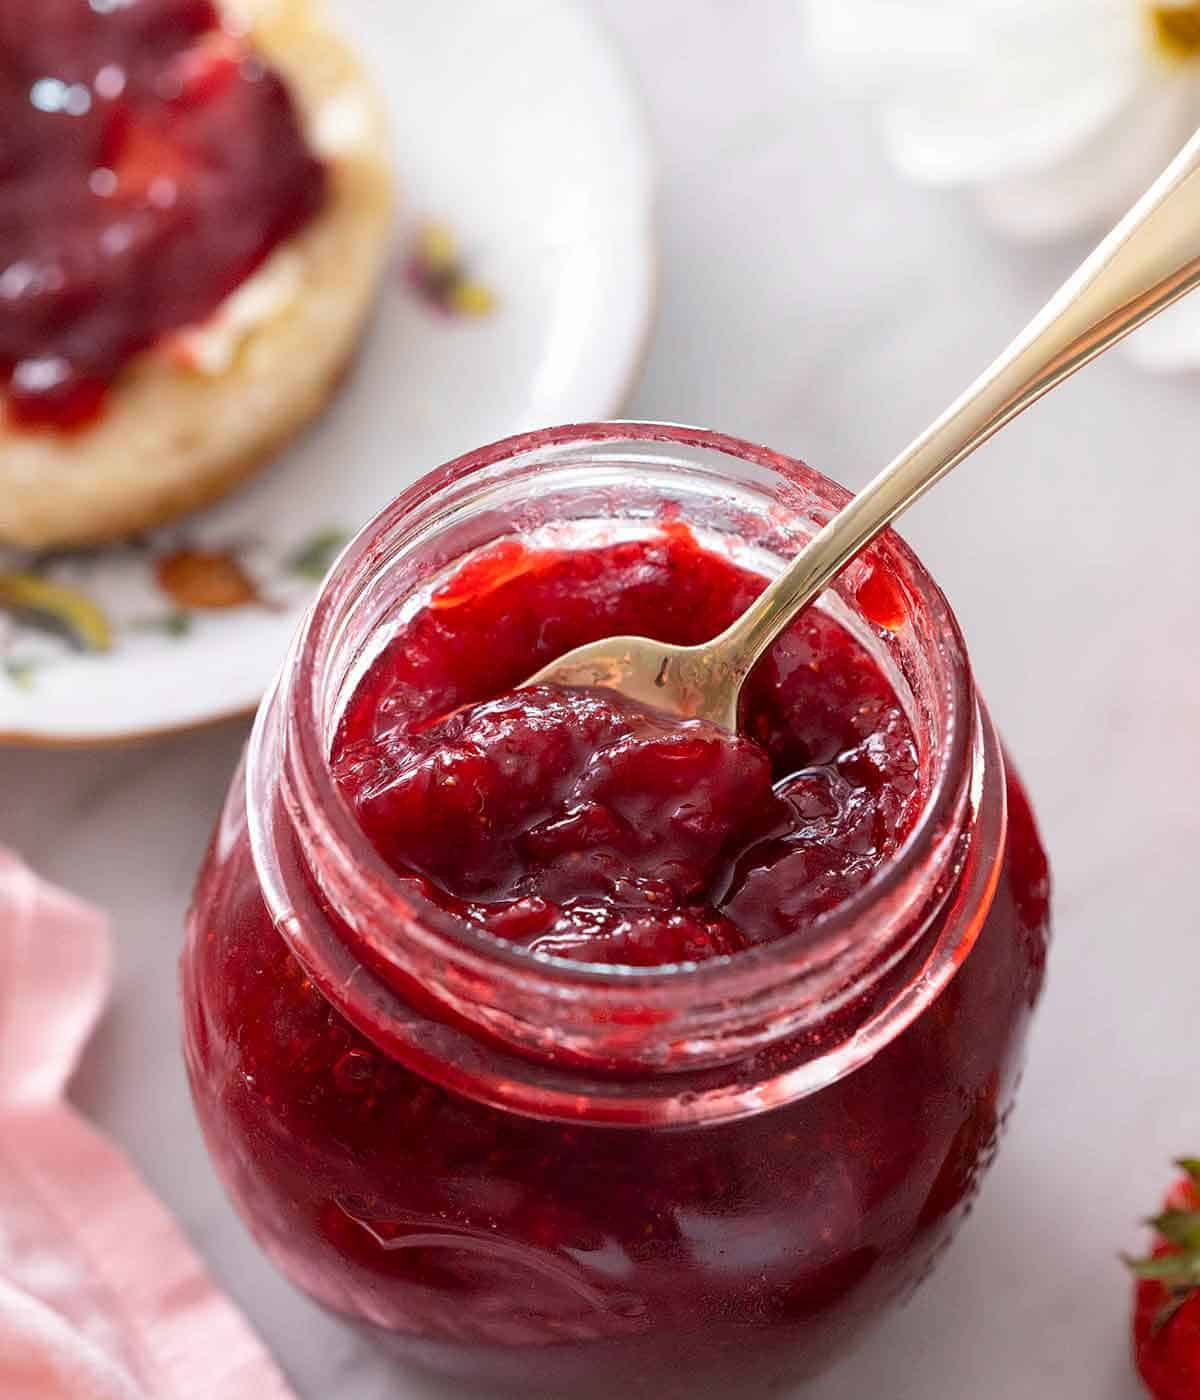 Overhead view of a mason jar of strawberry jam with a spoon inside.